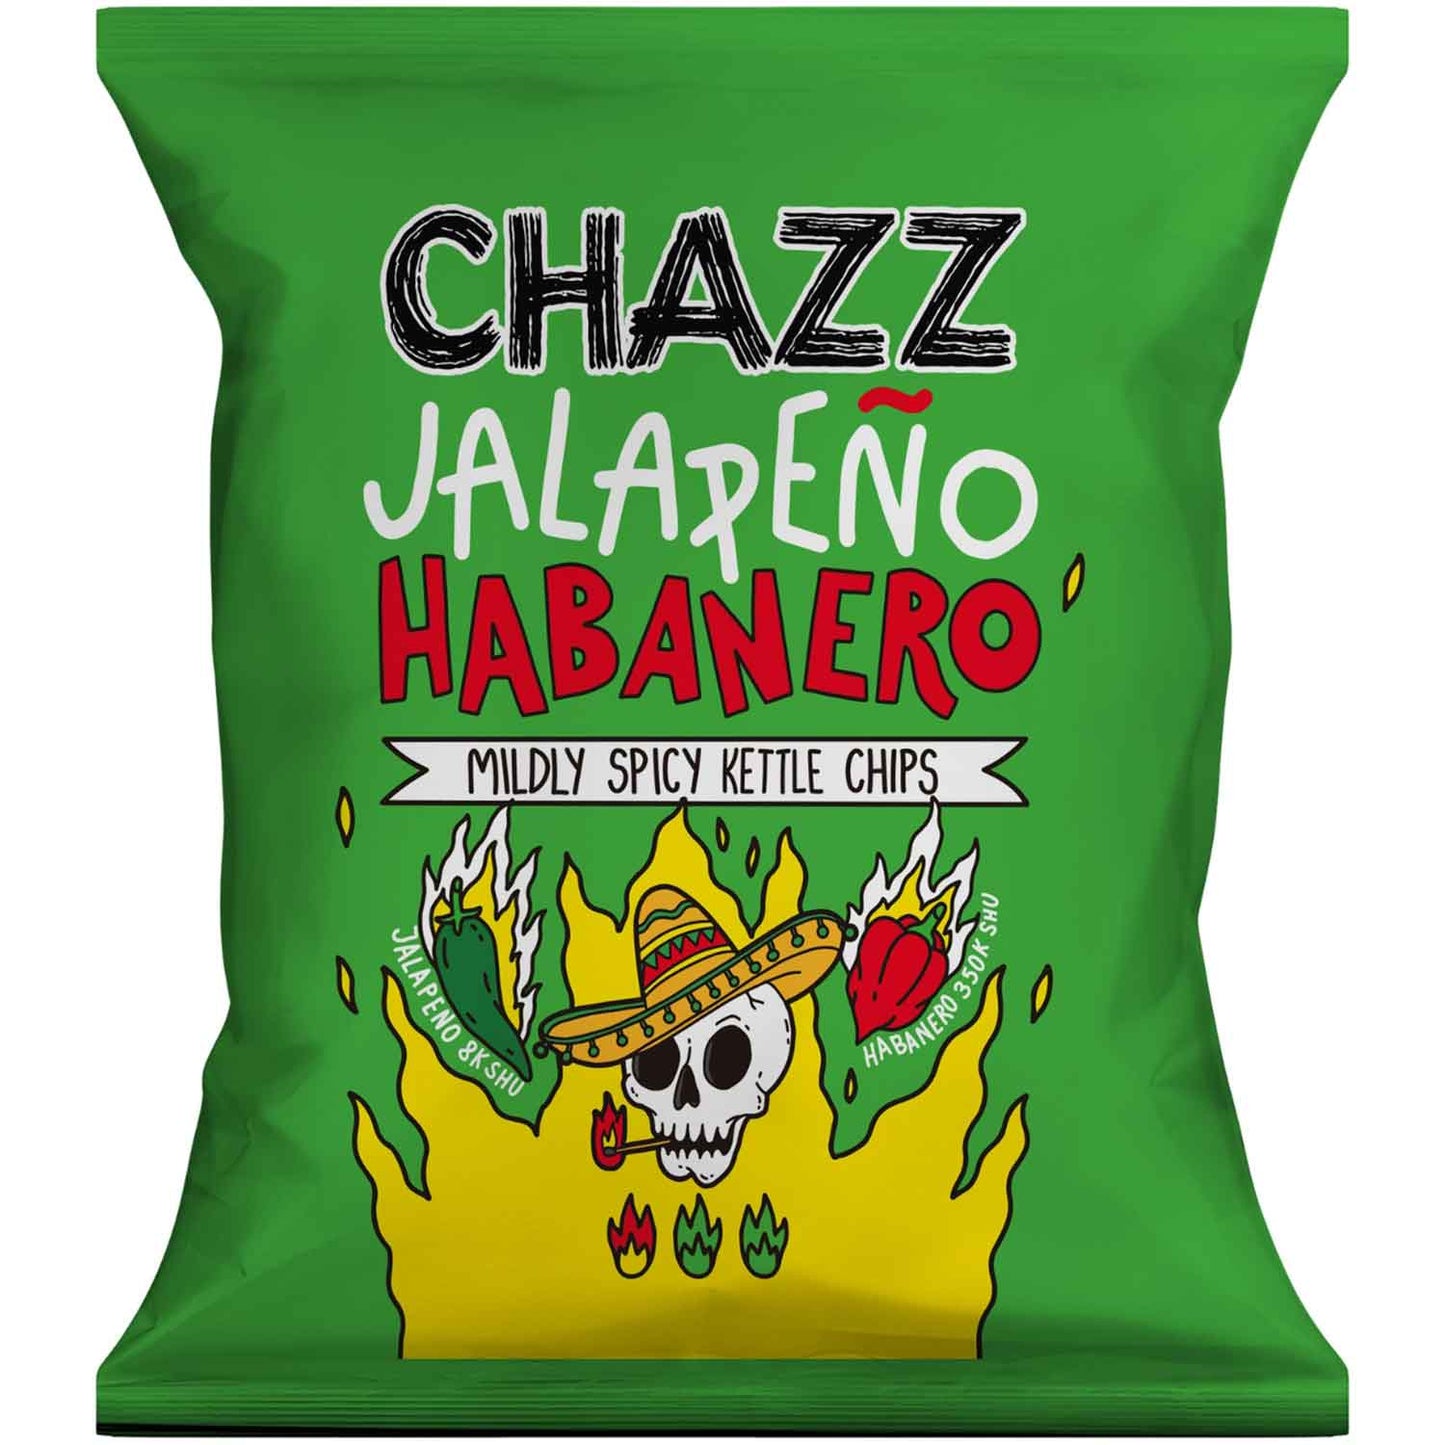 CHAZZ Kettle Chips Jalapeño Habanero Mildly Spicy 50g - Candyshop.ch